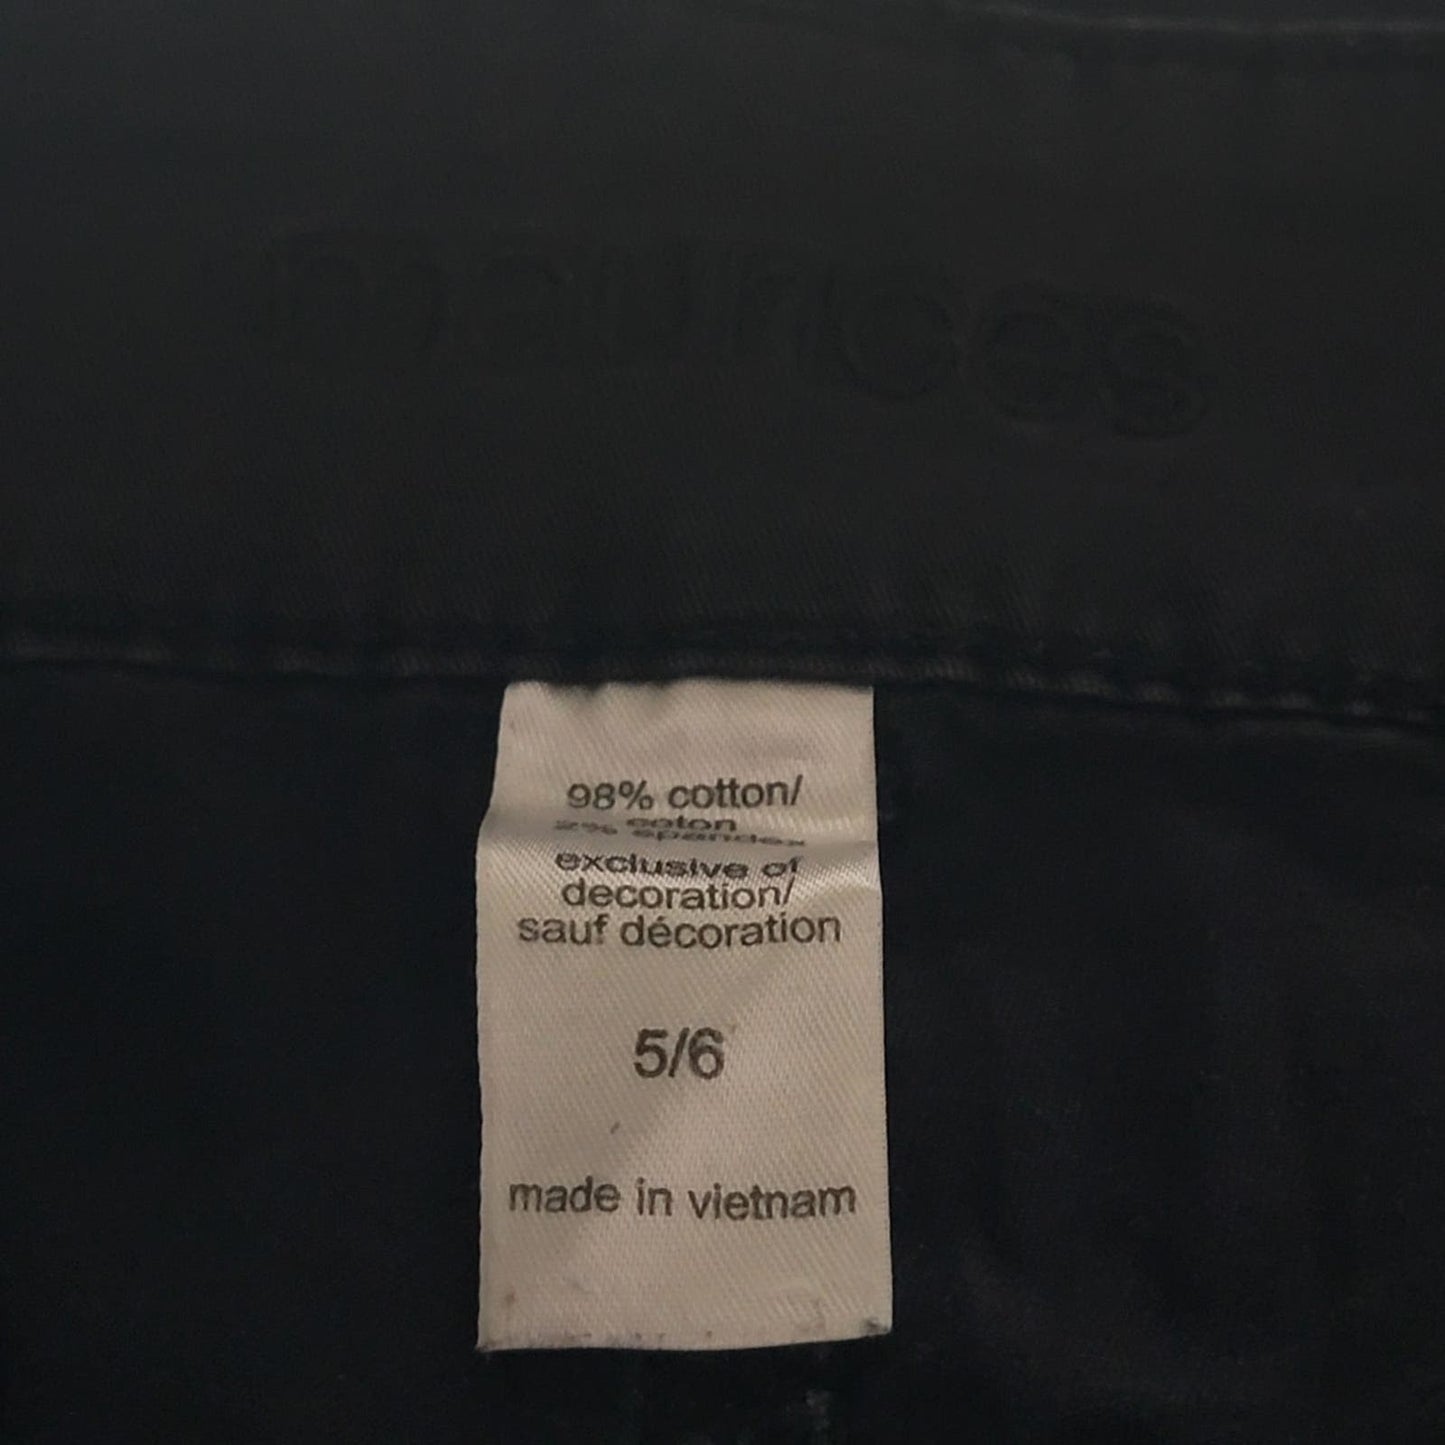 Maurices Black Mid Rise Shortsf